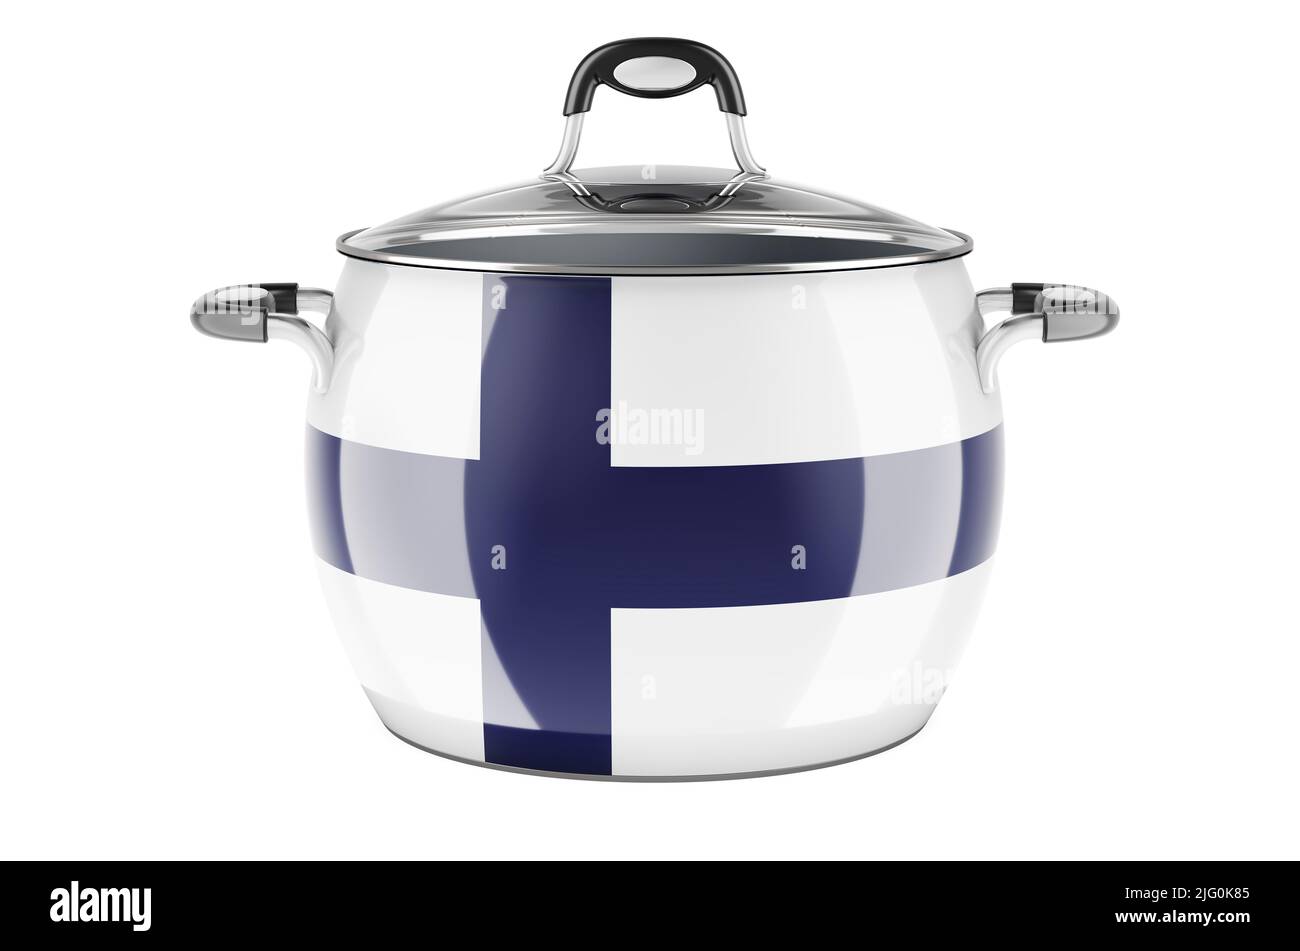 Finnish national cuisine concept. Finnish flag painted on the stainless steel stock pot. 3D rendering isolated on white background Stock Photo